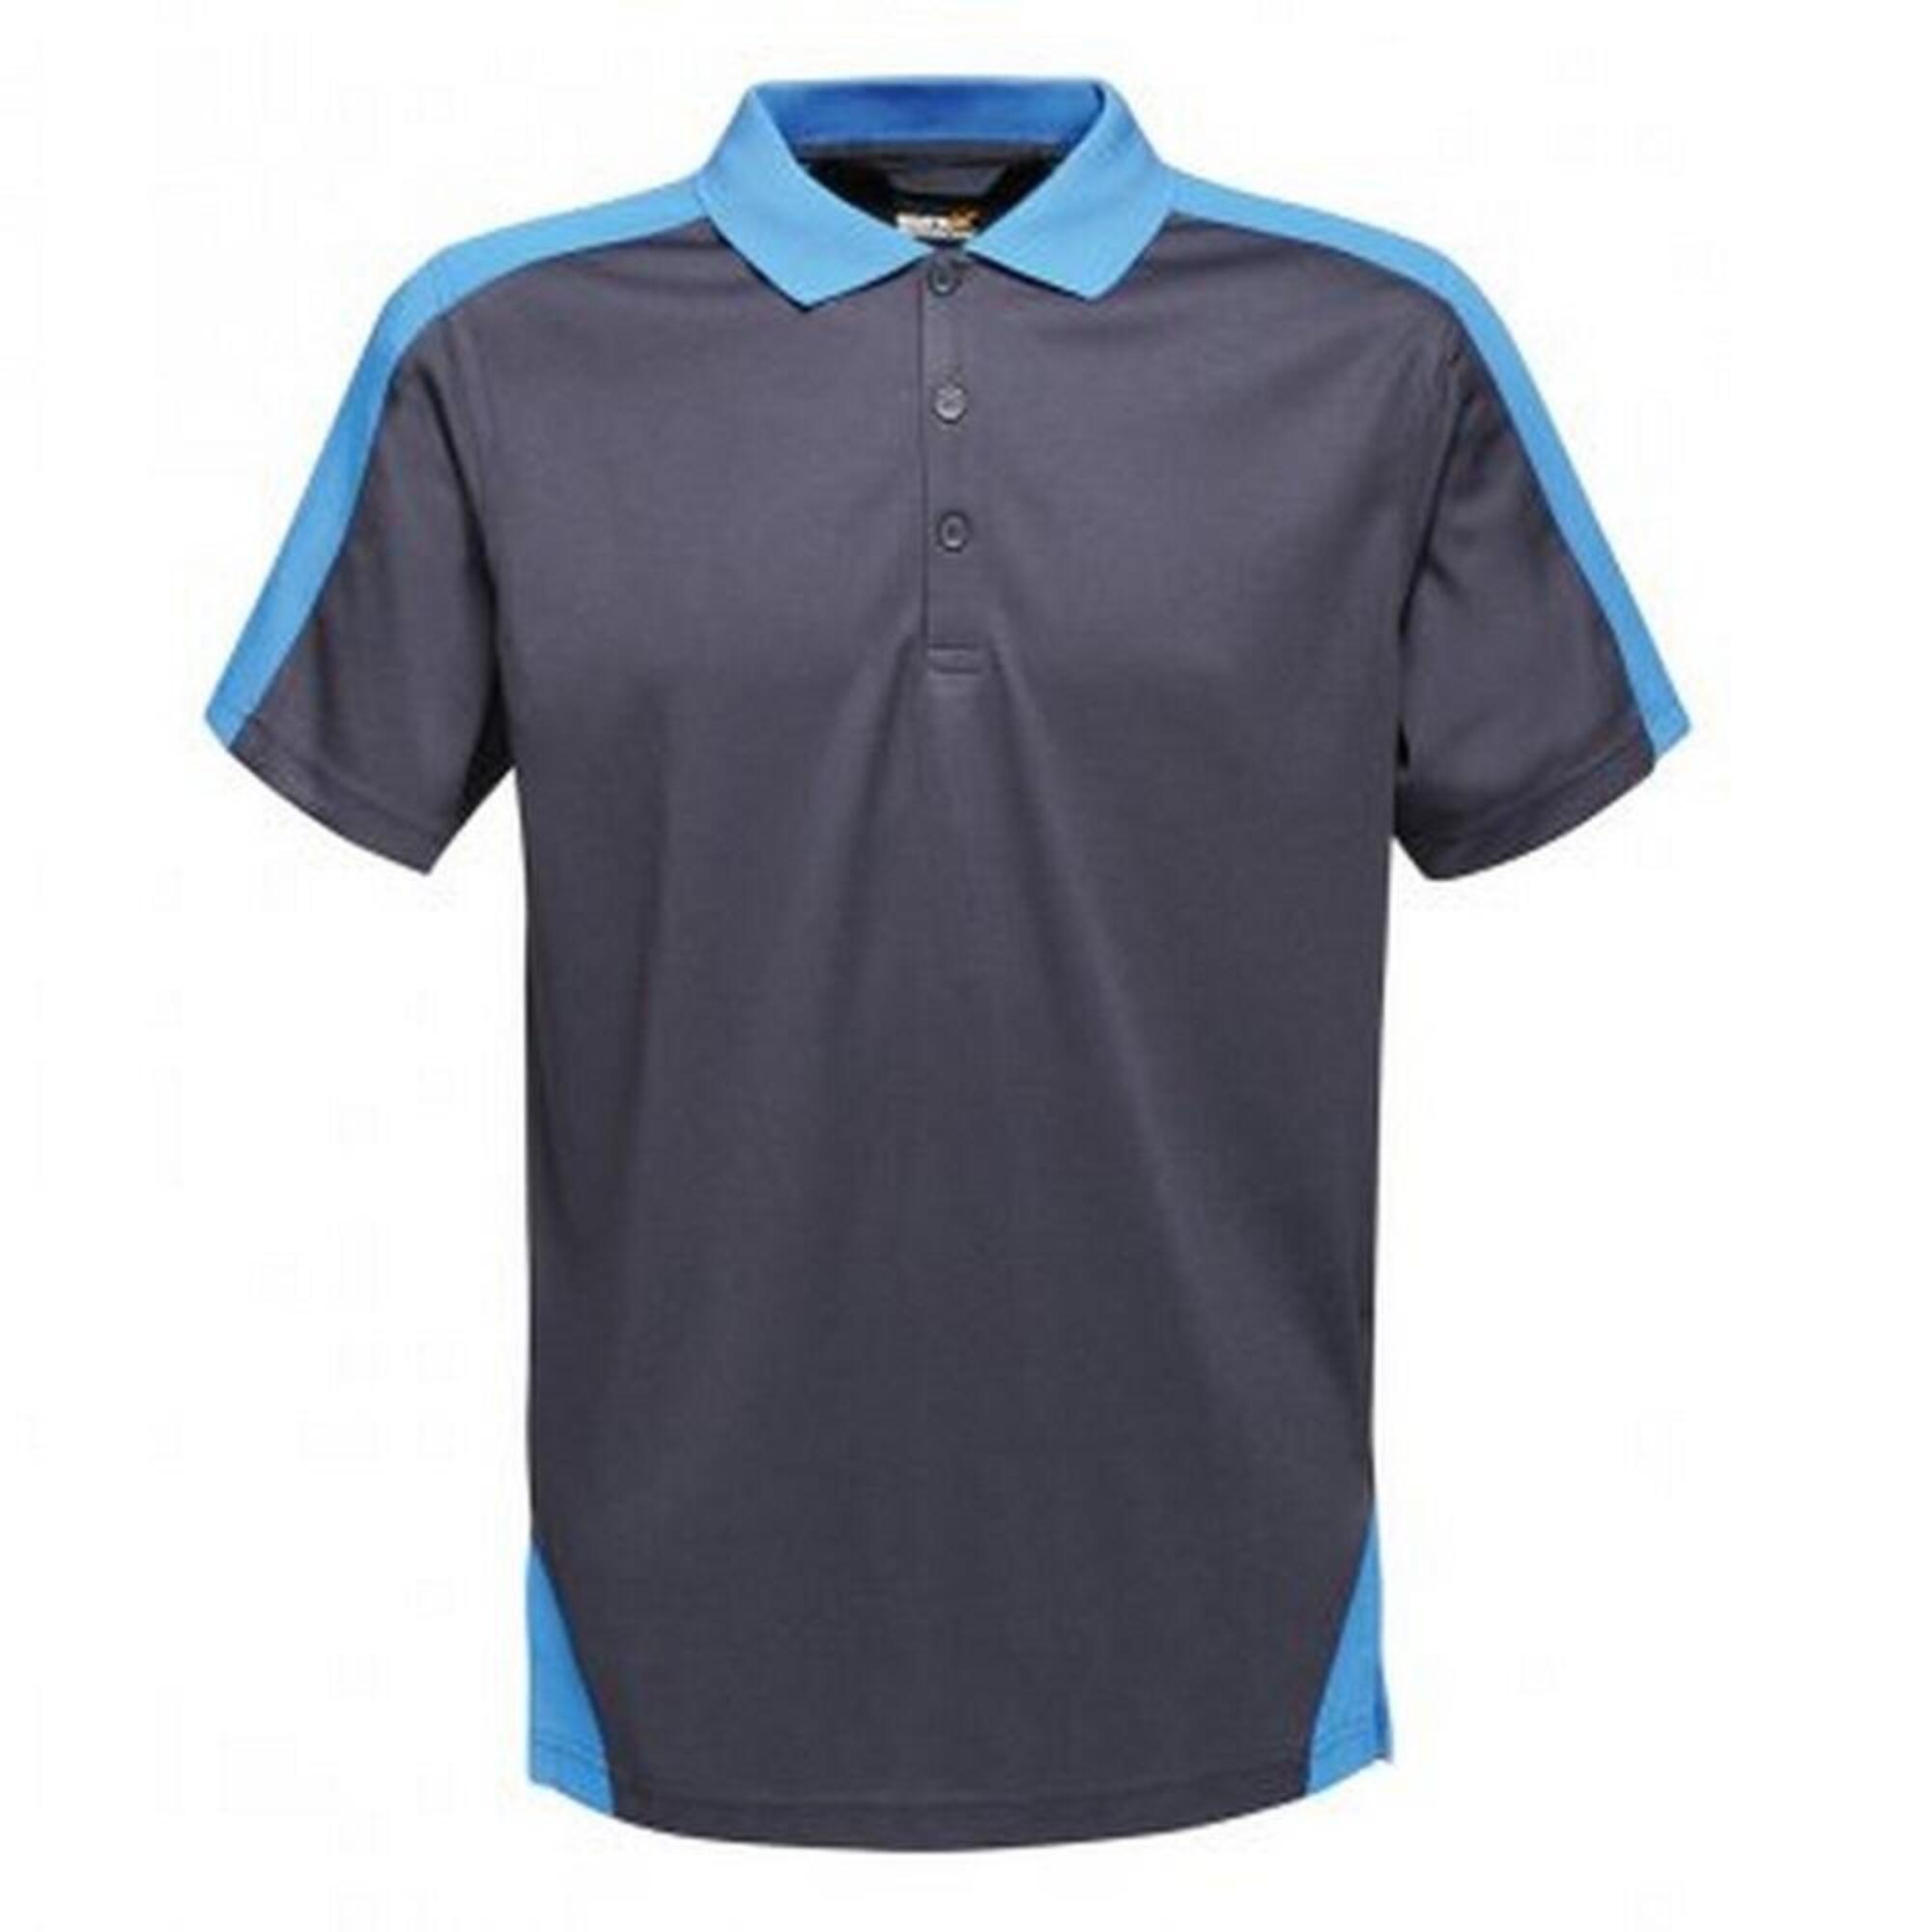 Contrast Coolweave Pique Polo Shirt (Navy/New Royal) 1/3